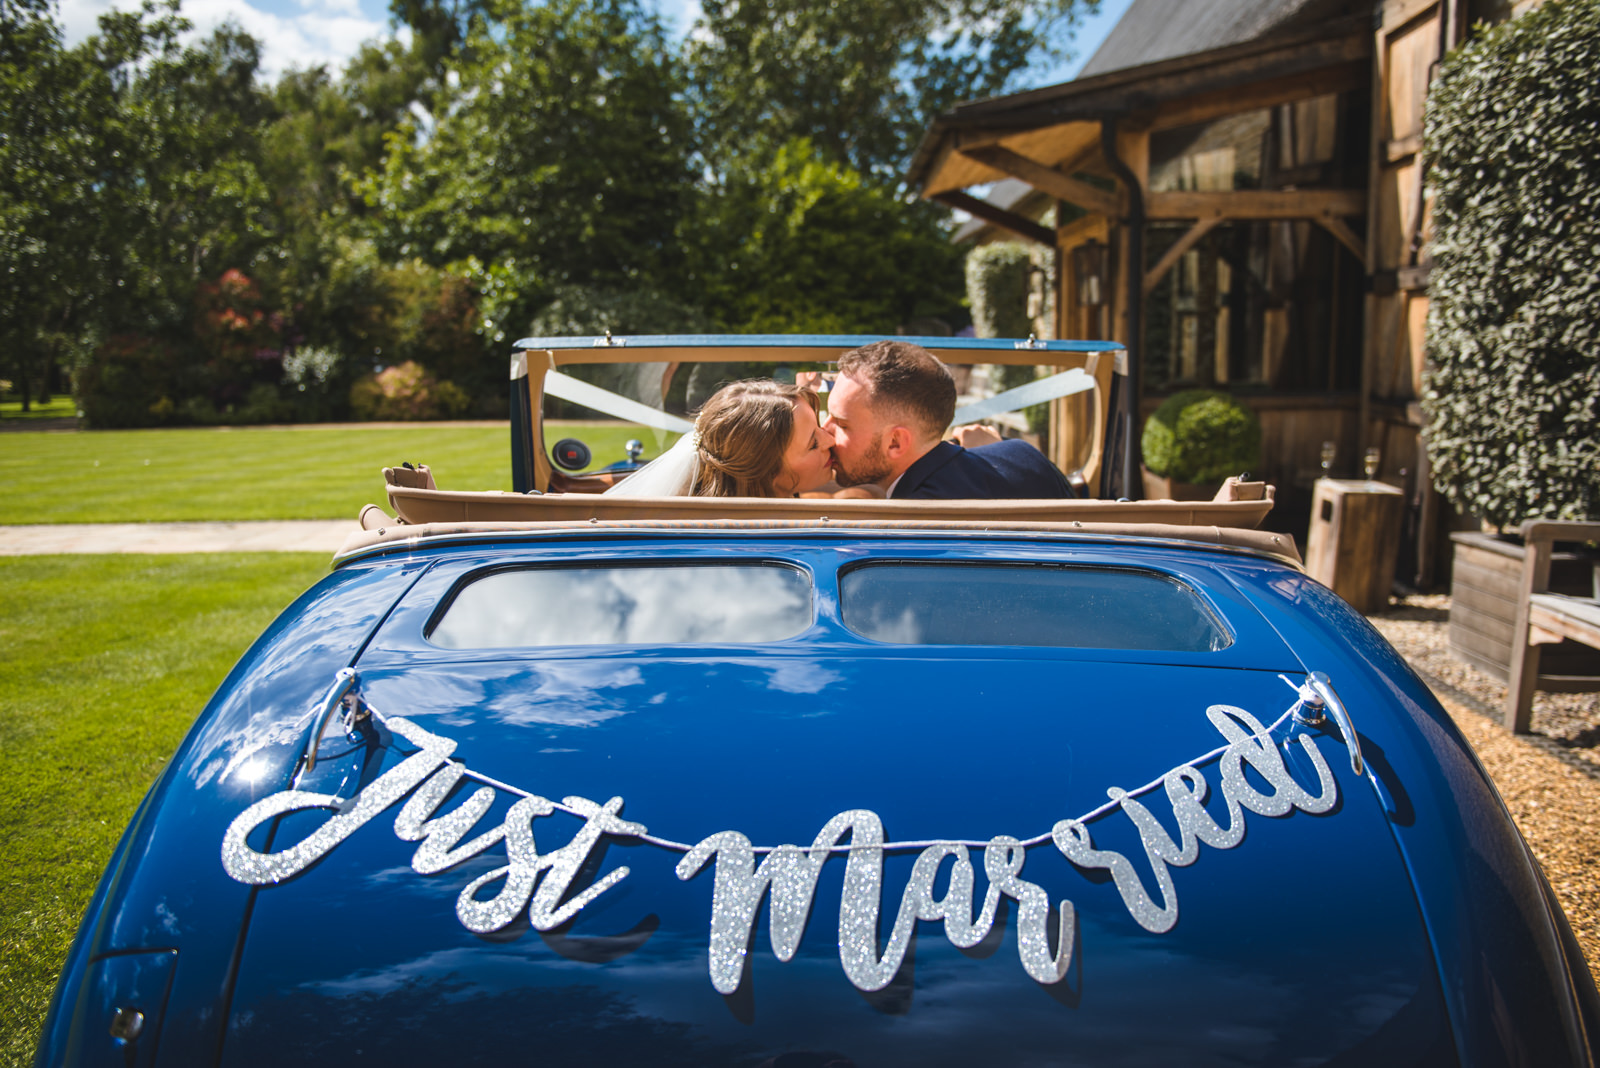 The bride and groom photographed in their vintage blue wedding car.